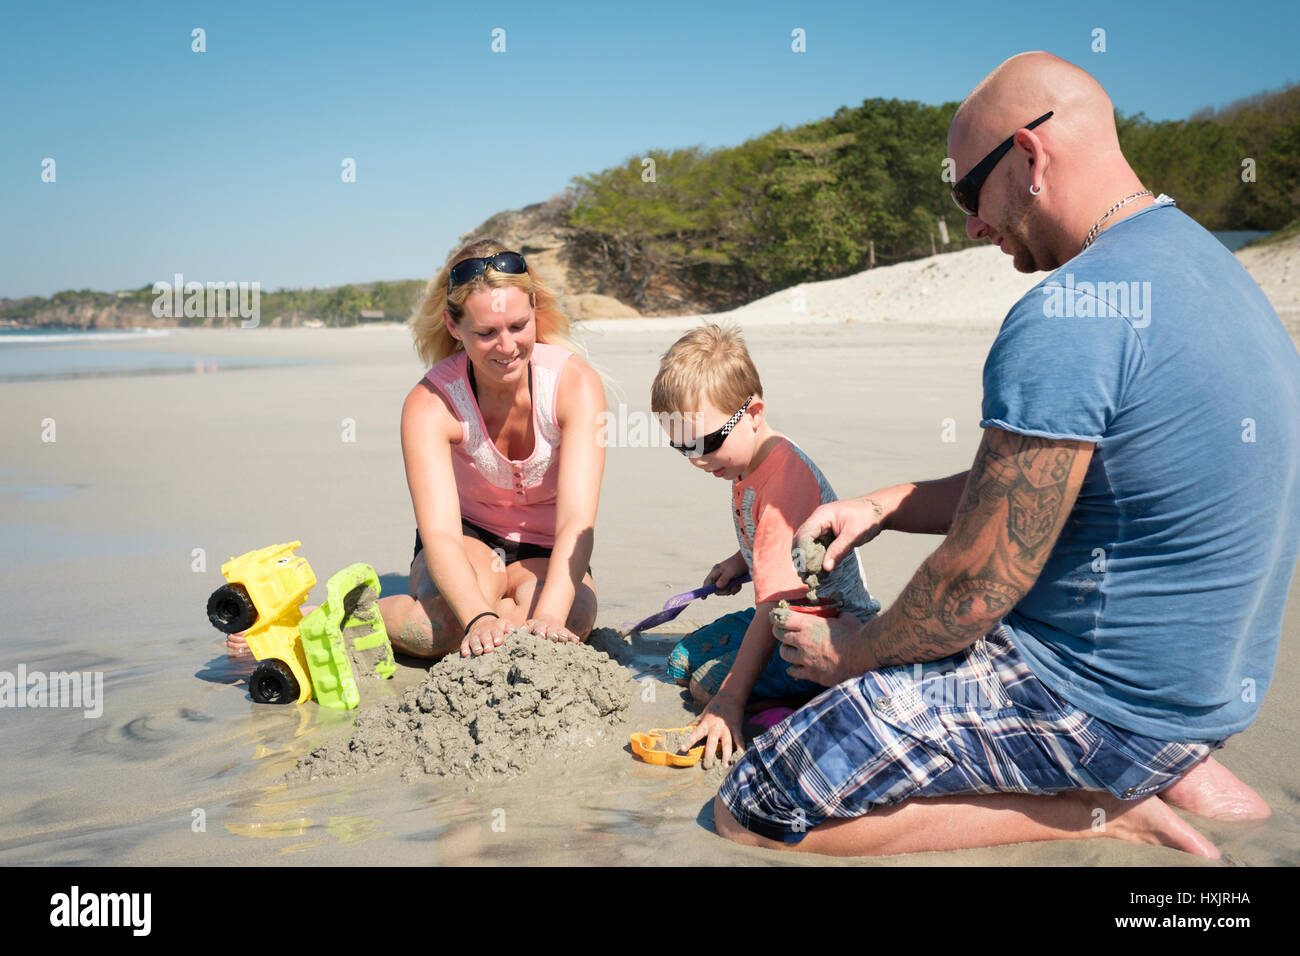 Family of 3 playing in the sand on the beach, Father, mother, toddler son. Riviera Nayarit, Mexico Stock Photo